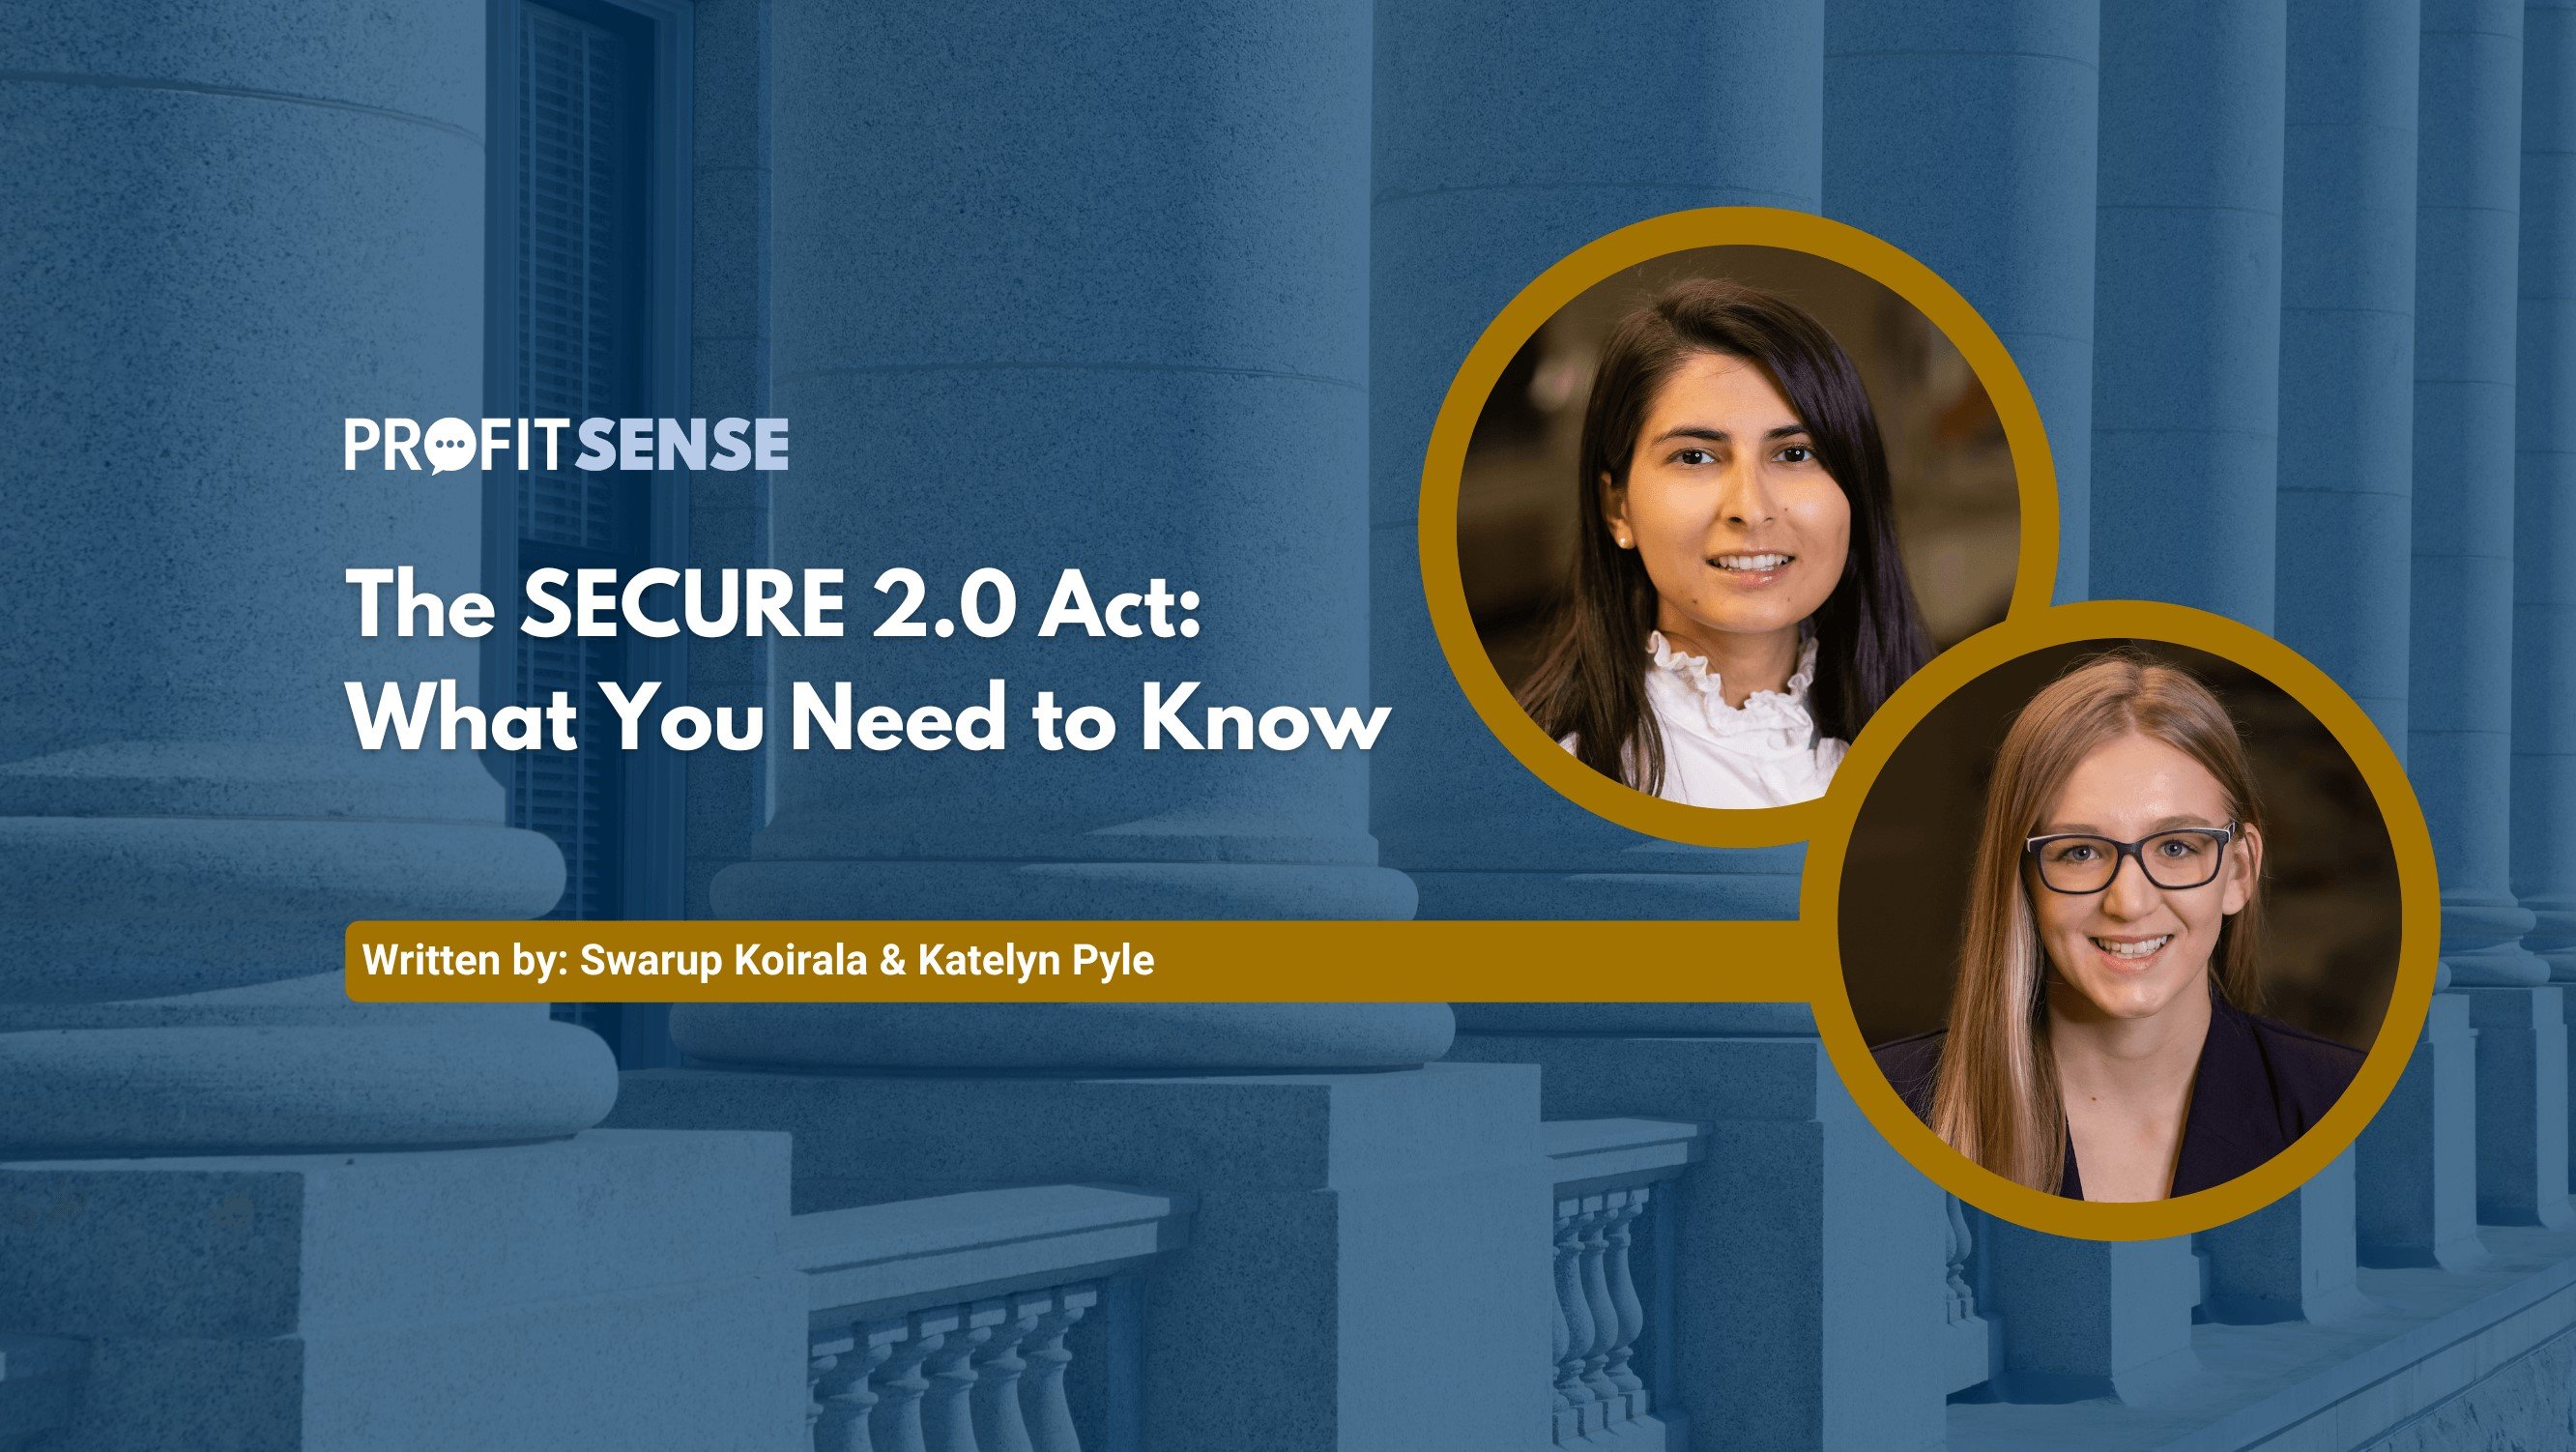 The Secure 2.0 Act: What You Need to Know